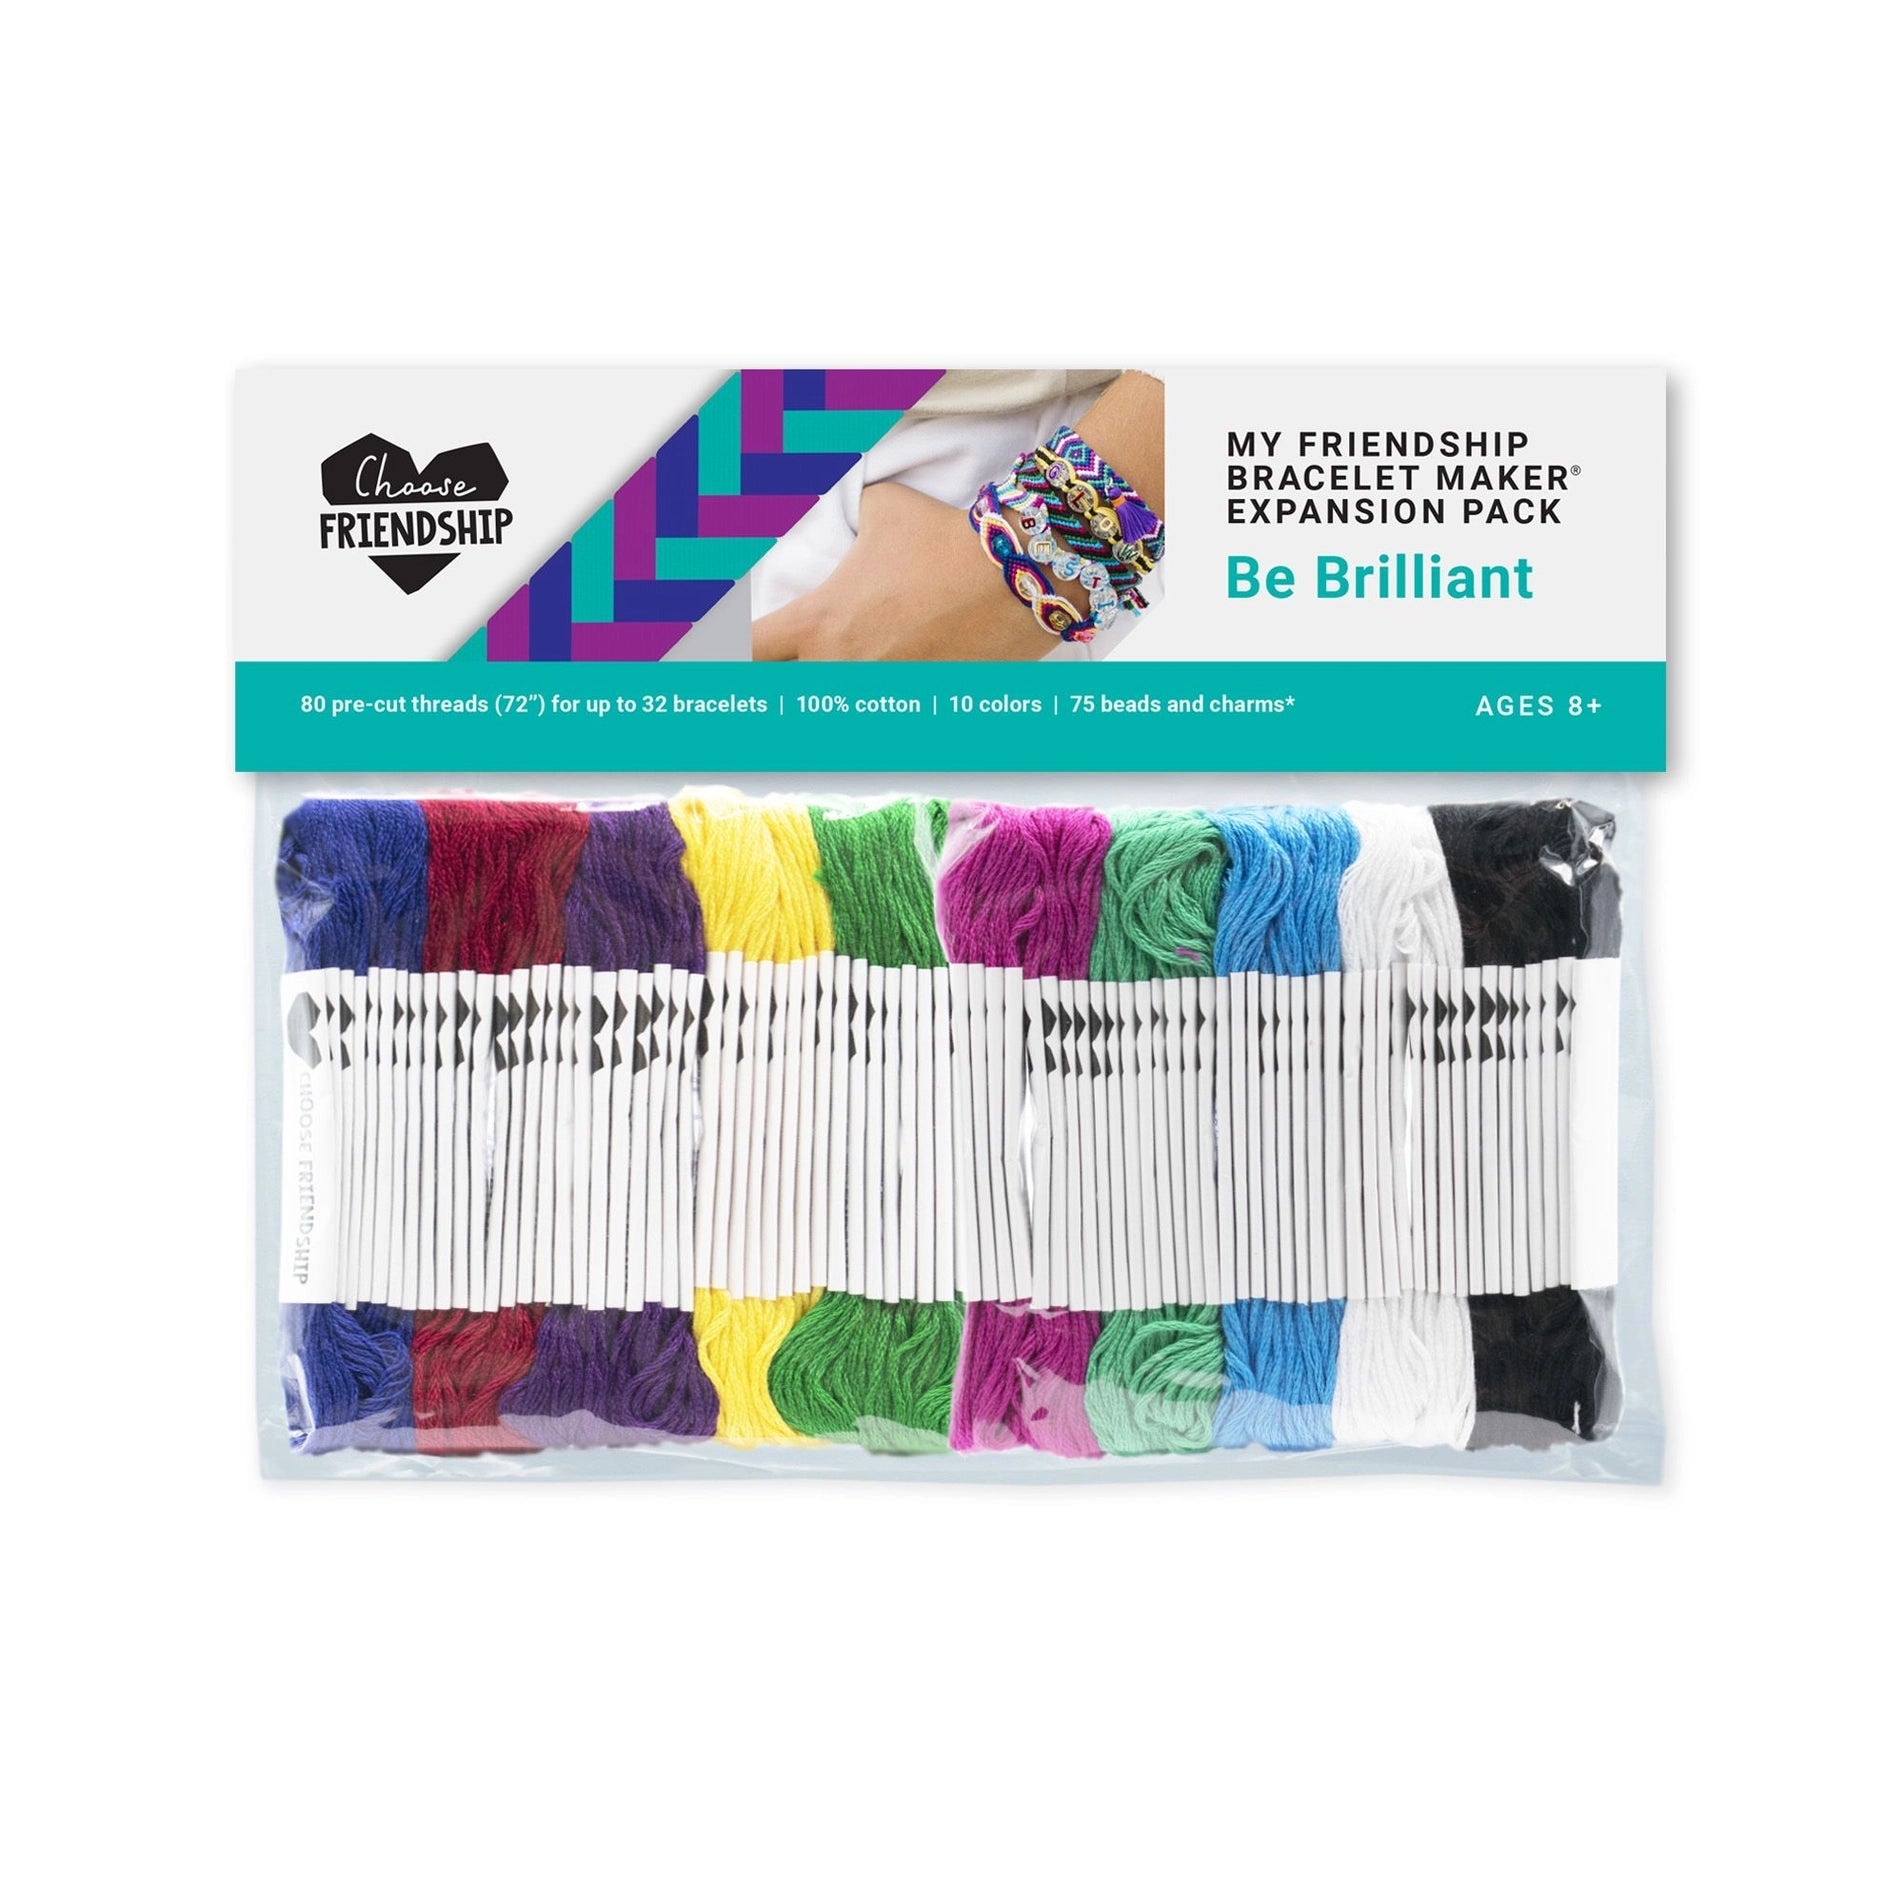 Choose Friendship, My Friendship Bracelet Maker (New and Improved), An American Original | 20 Pre-Cut Threads - Makes Up to 8 Bracelets | Craft Kit